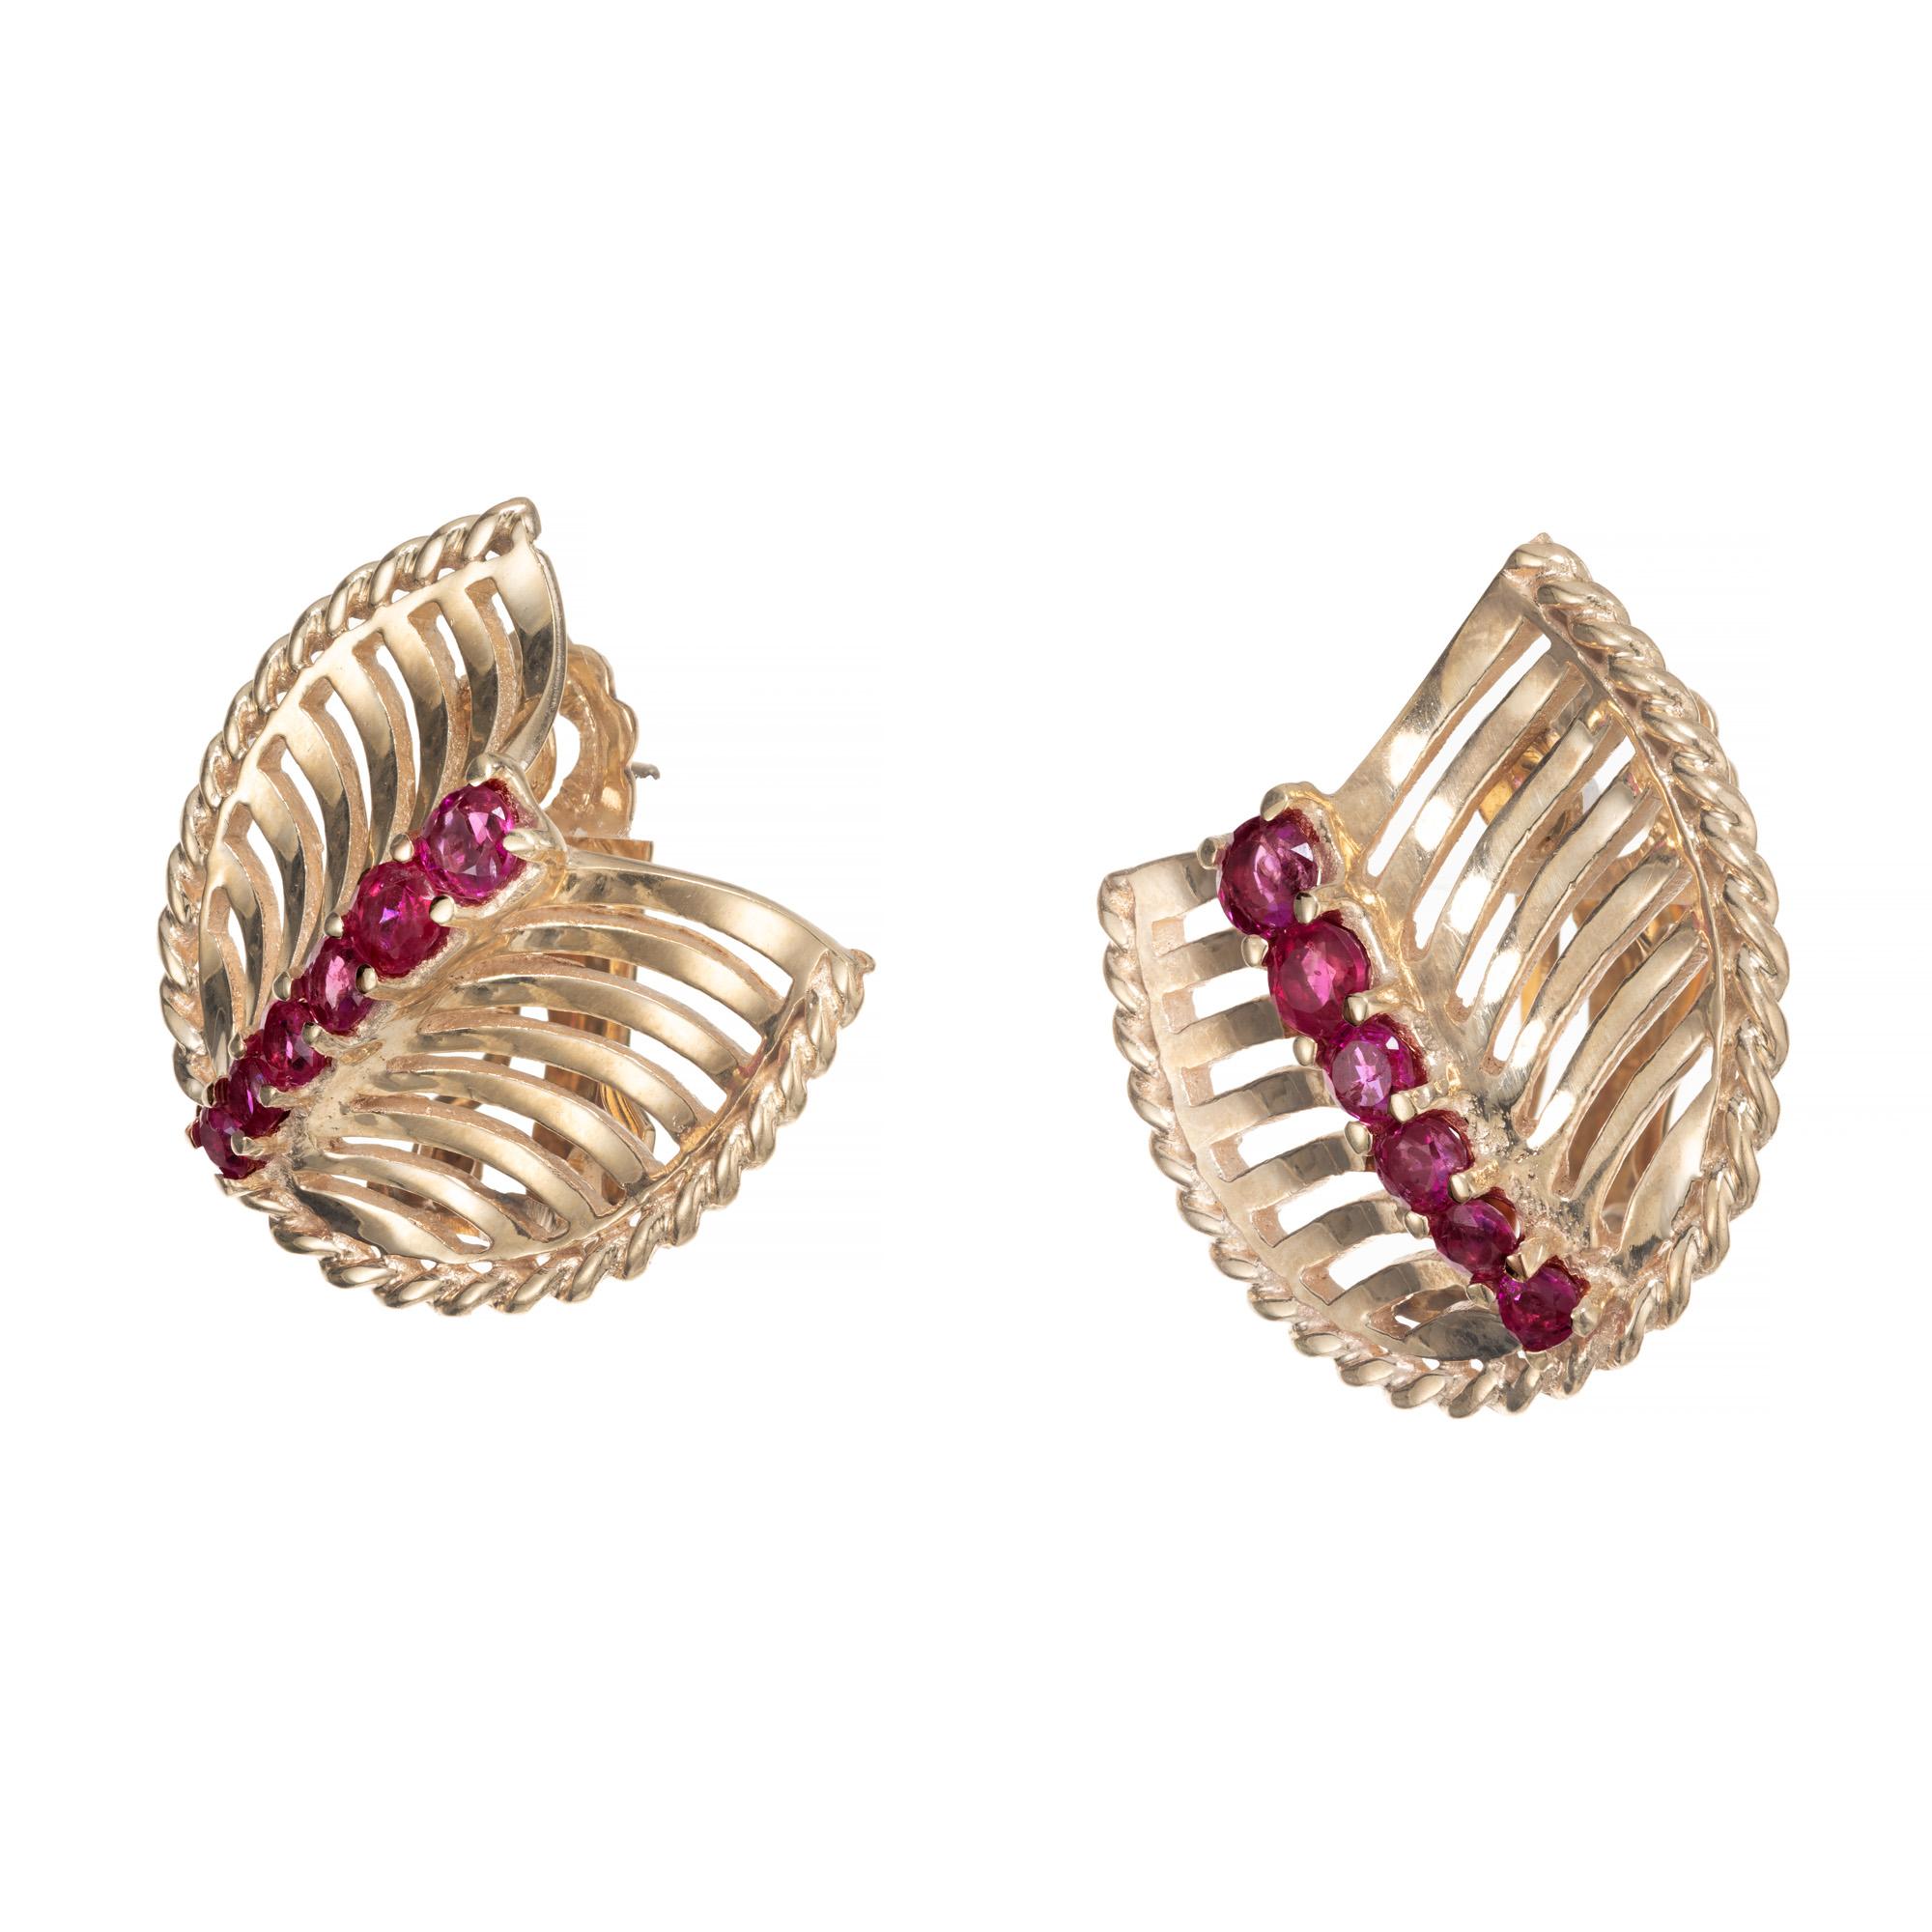 Unique vintage 1950's ruby yellow gold earrings. These mid-century 14k yellow gold fan style earrings are each adorned with a row of 6 graduated rubies. GIA has certified these as natural, no heat round sapphires. They have a clip post back to them.